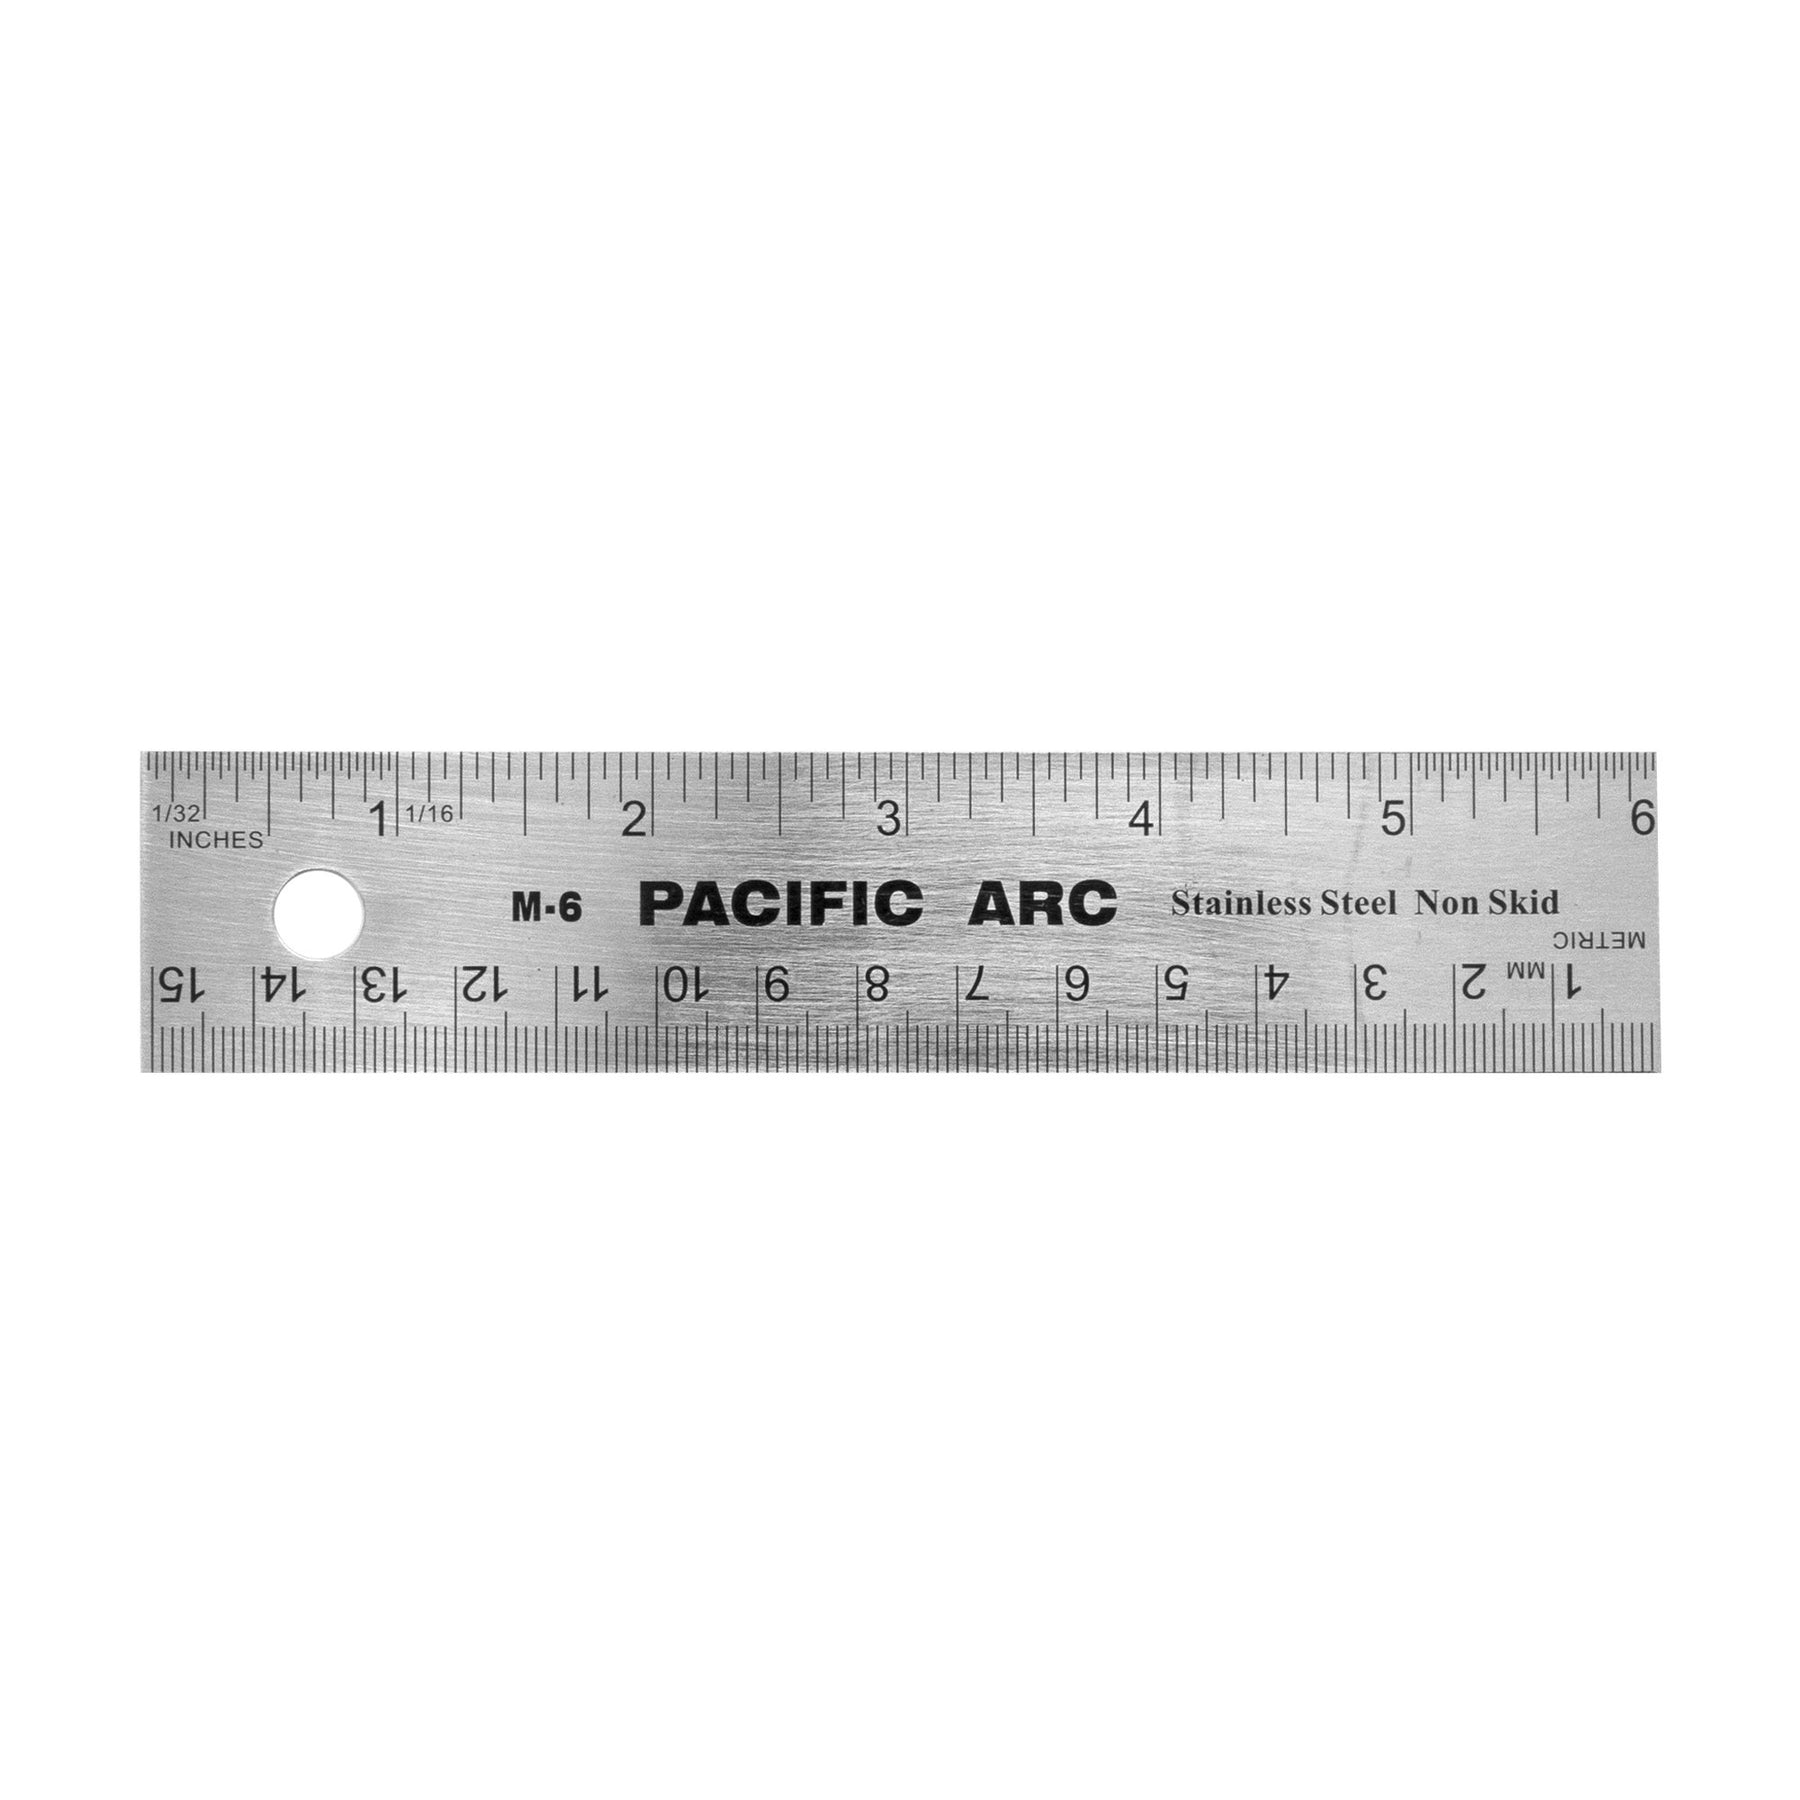 GN 711 Inch Size, Plastic or Stainless Steel Rulers, with Self-Adhesive  Backing